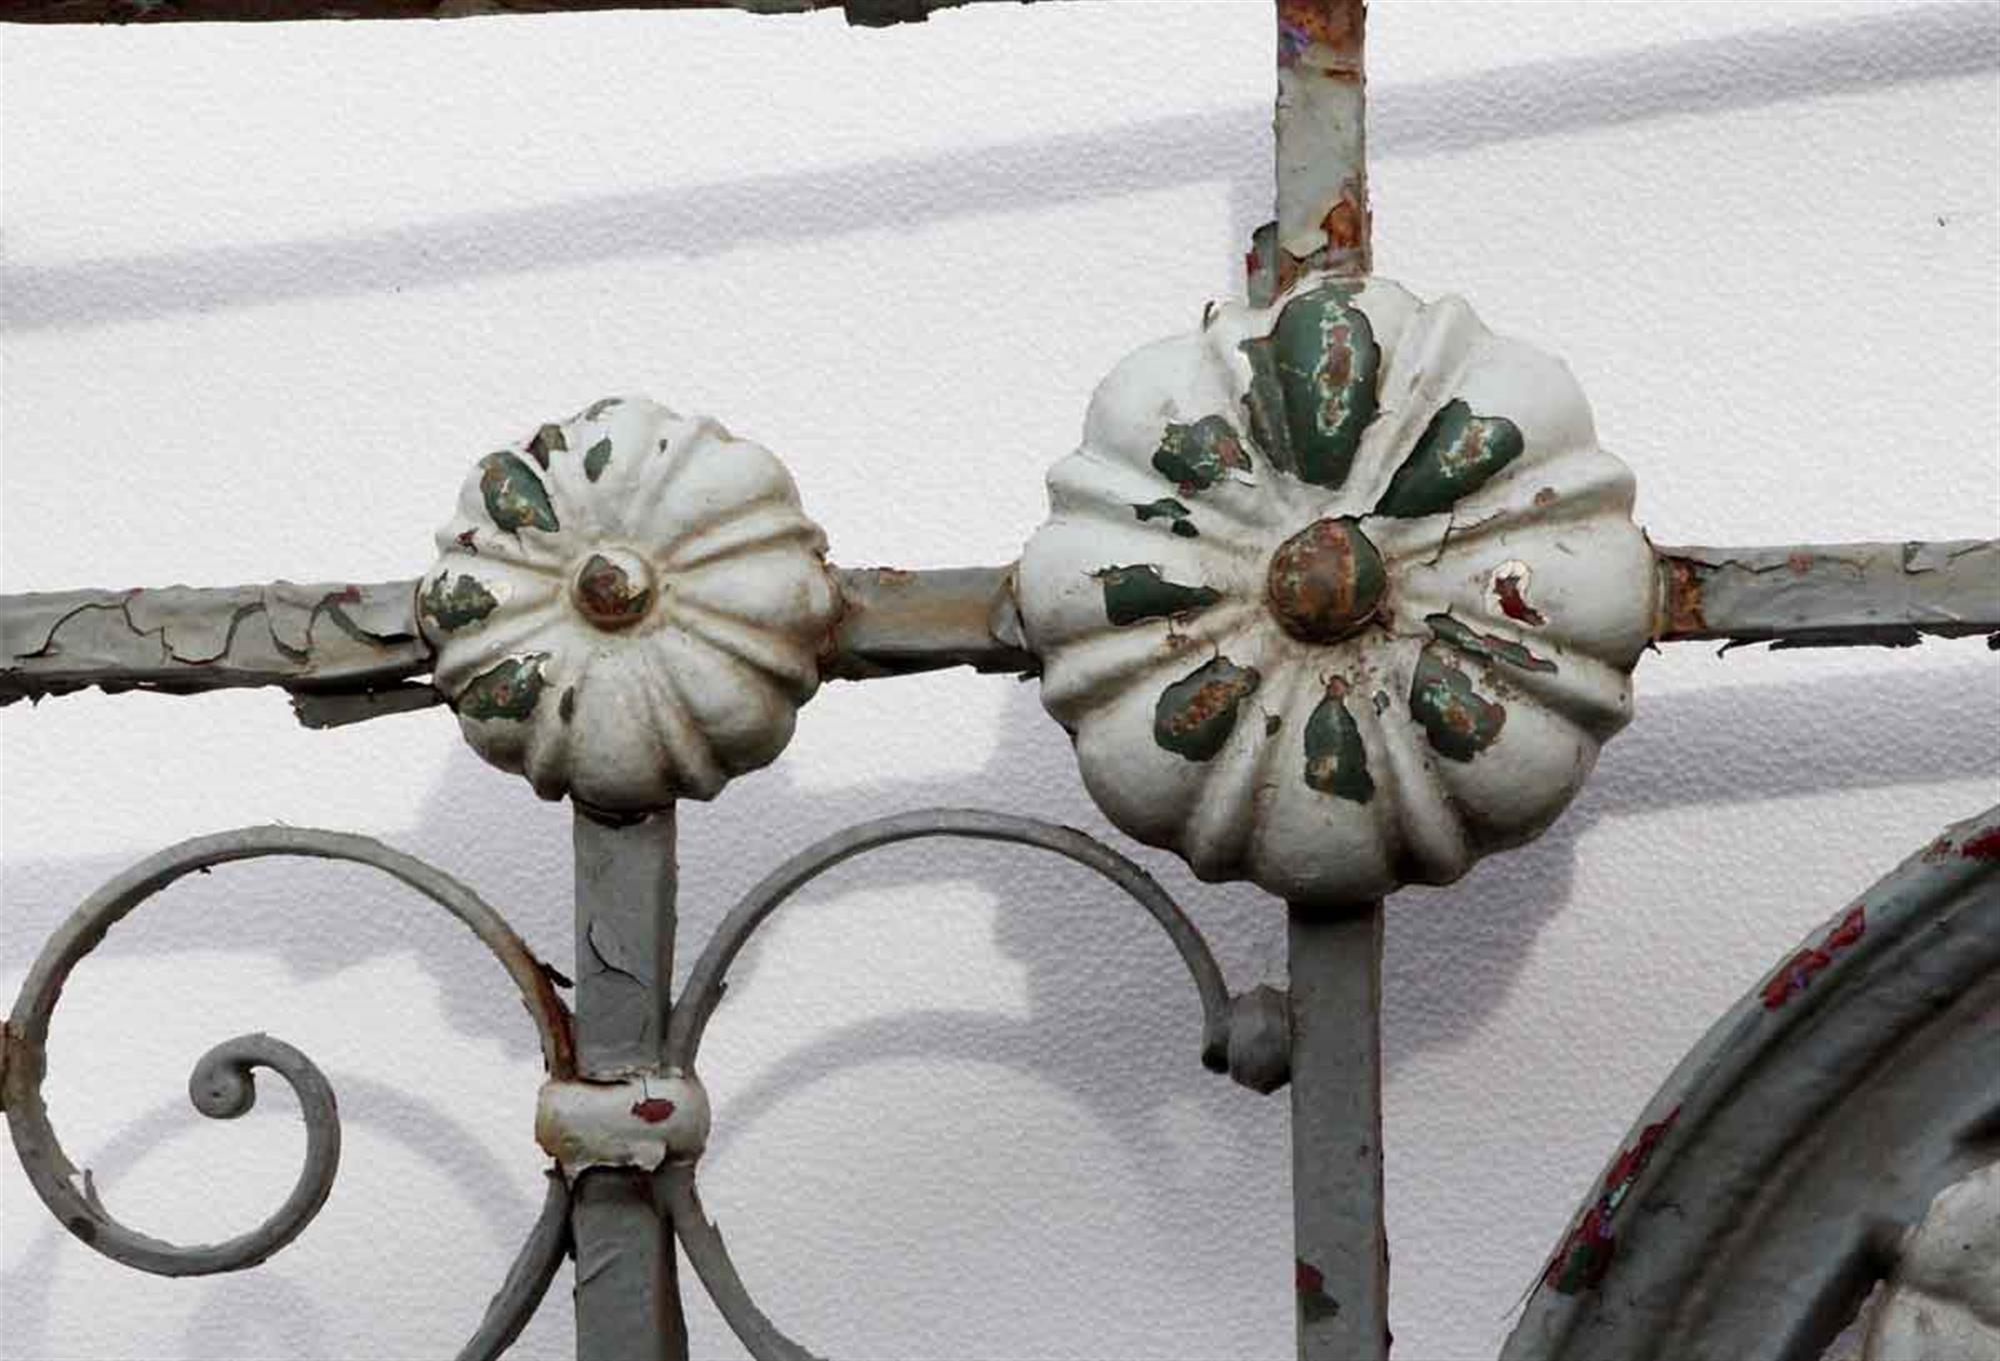 wrought iron balcony for sale